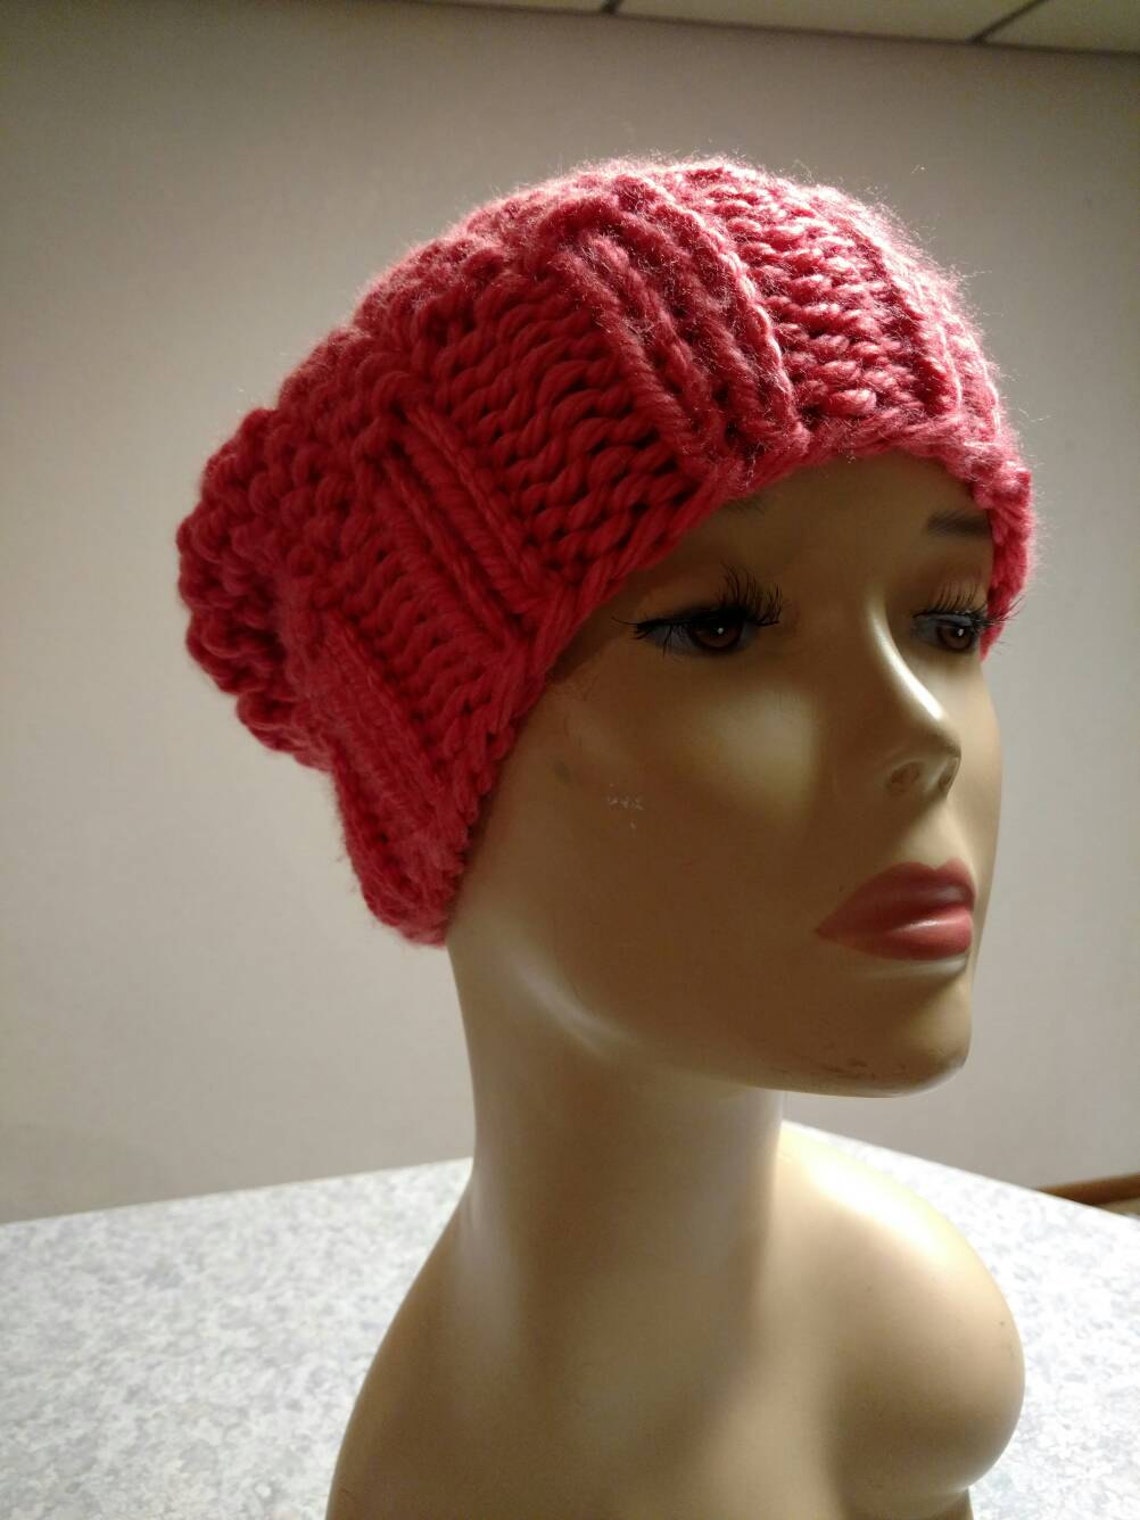 ONLY ONE Winter Knit Slouchy Hat in Coral - Etsy